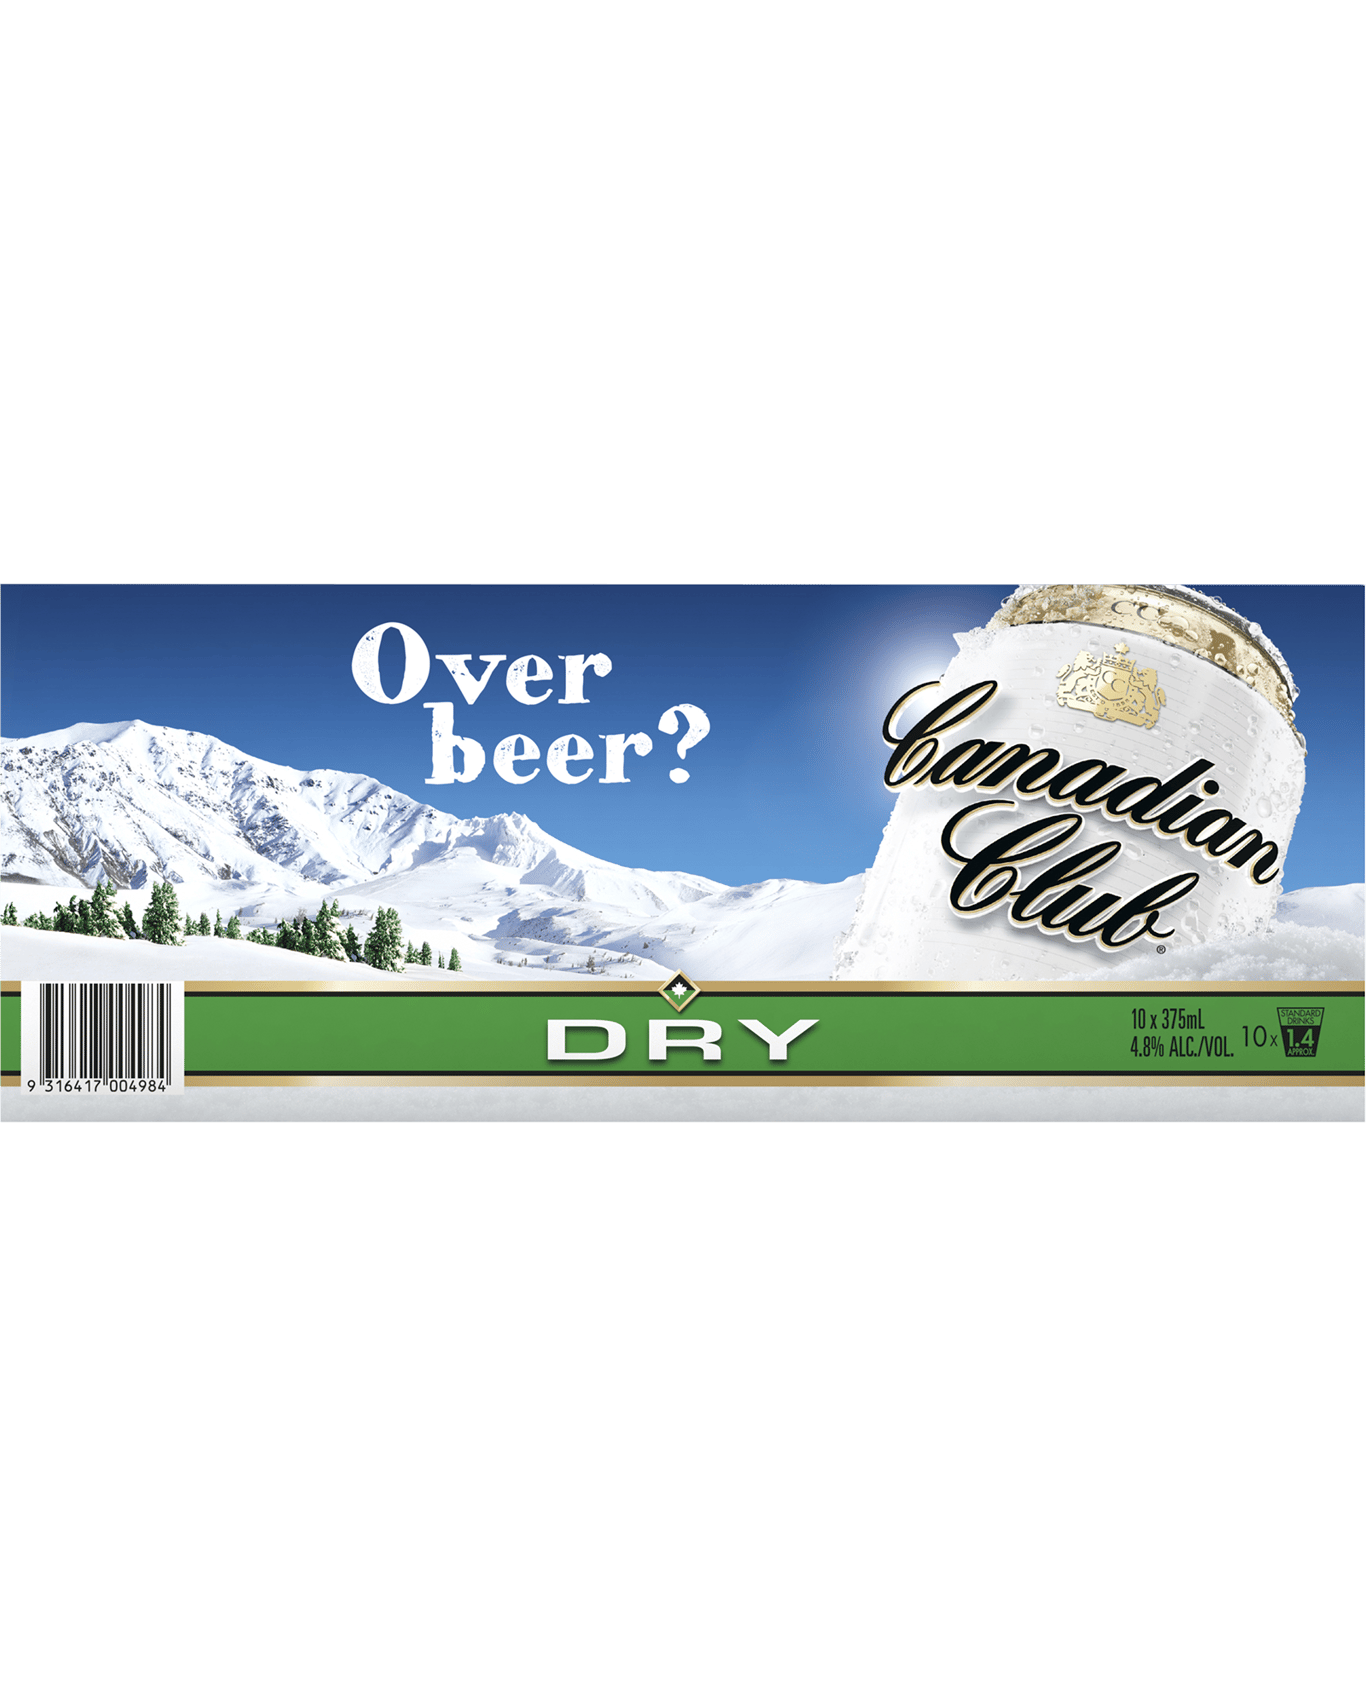 Canadian Club Whisky & Dry 4.8% Cans 10 Pack 375ml (Unbeatable Prices ...